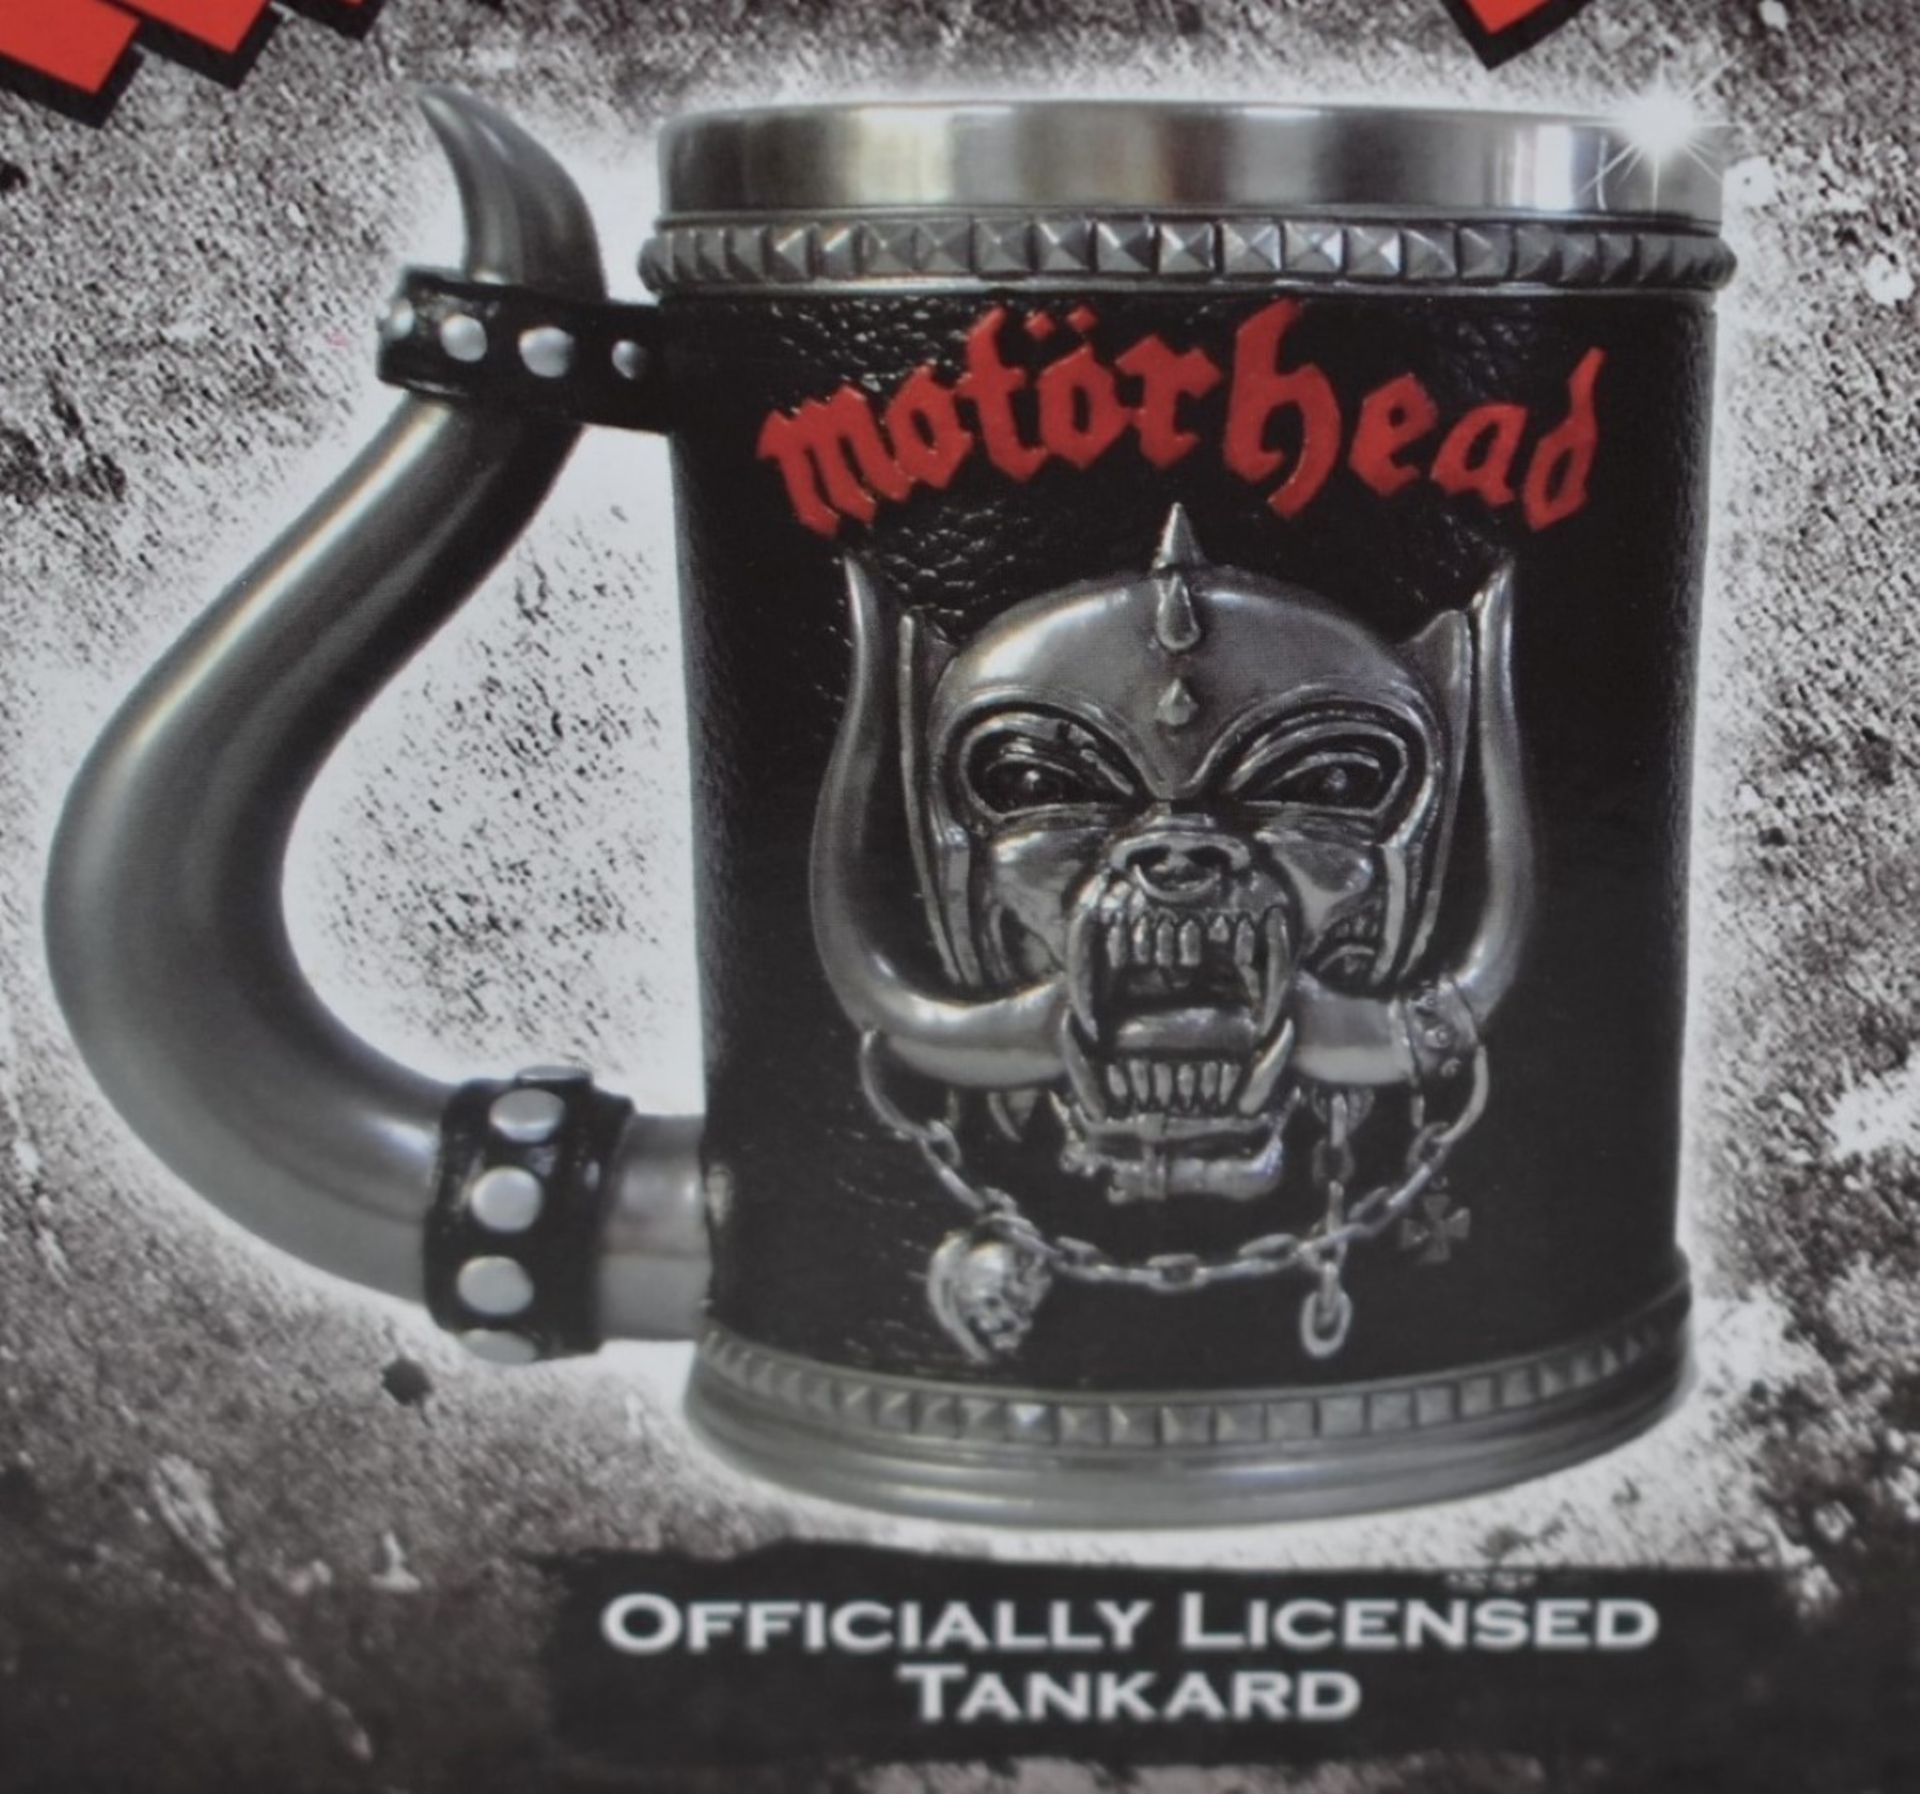 1 x Motorhead Drinks Tanker By Nemesis Now - Features Detailed Warpig Sculpture, Hand Painted - Image 5 of 8